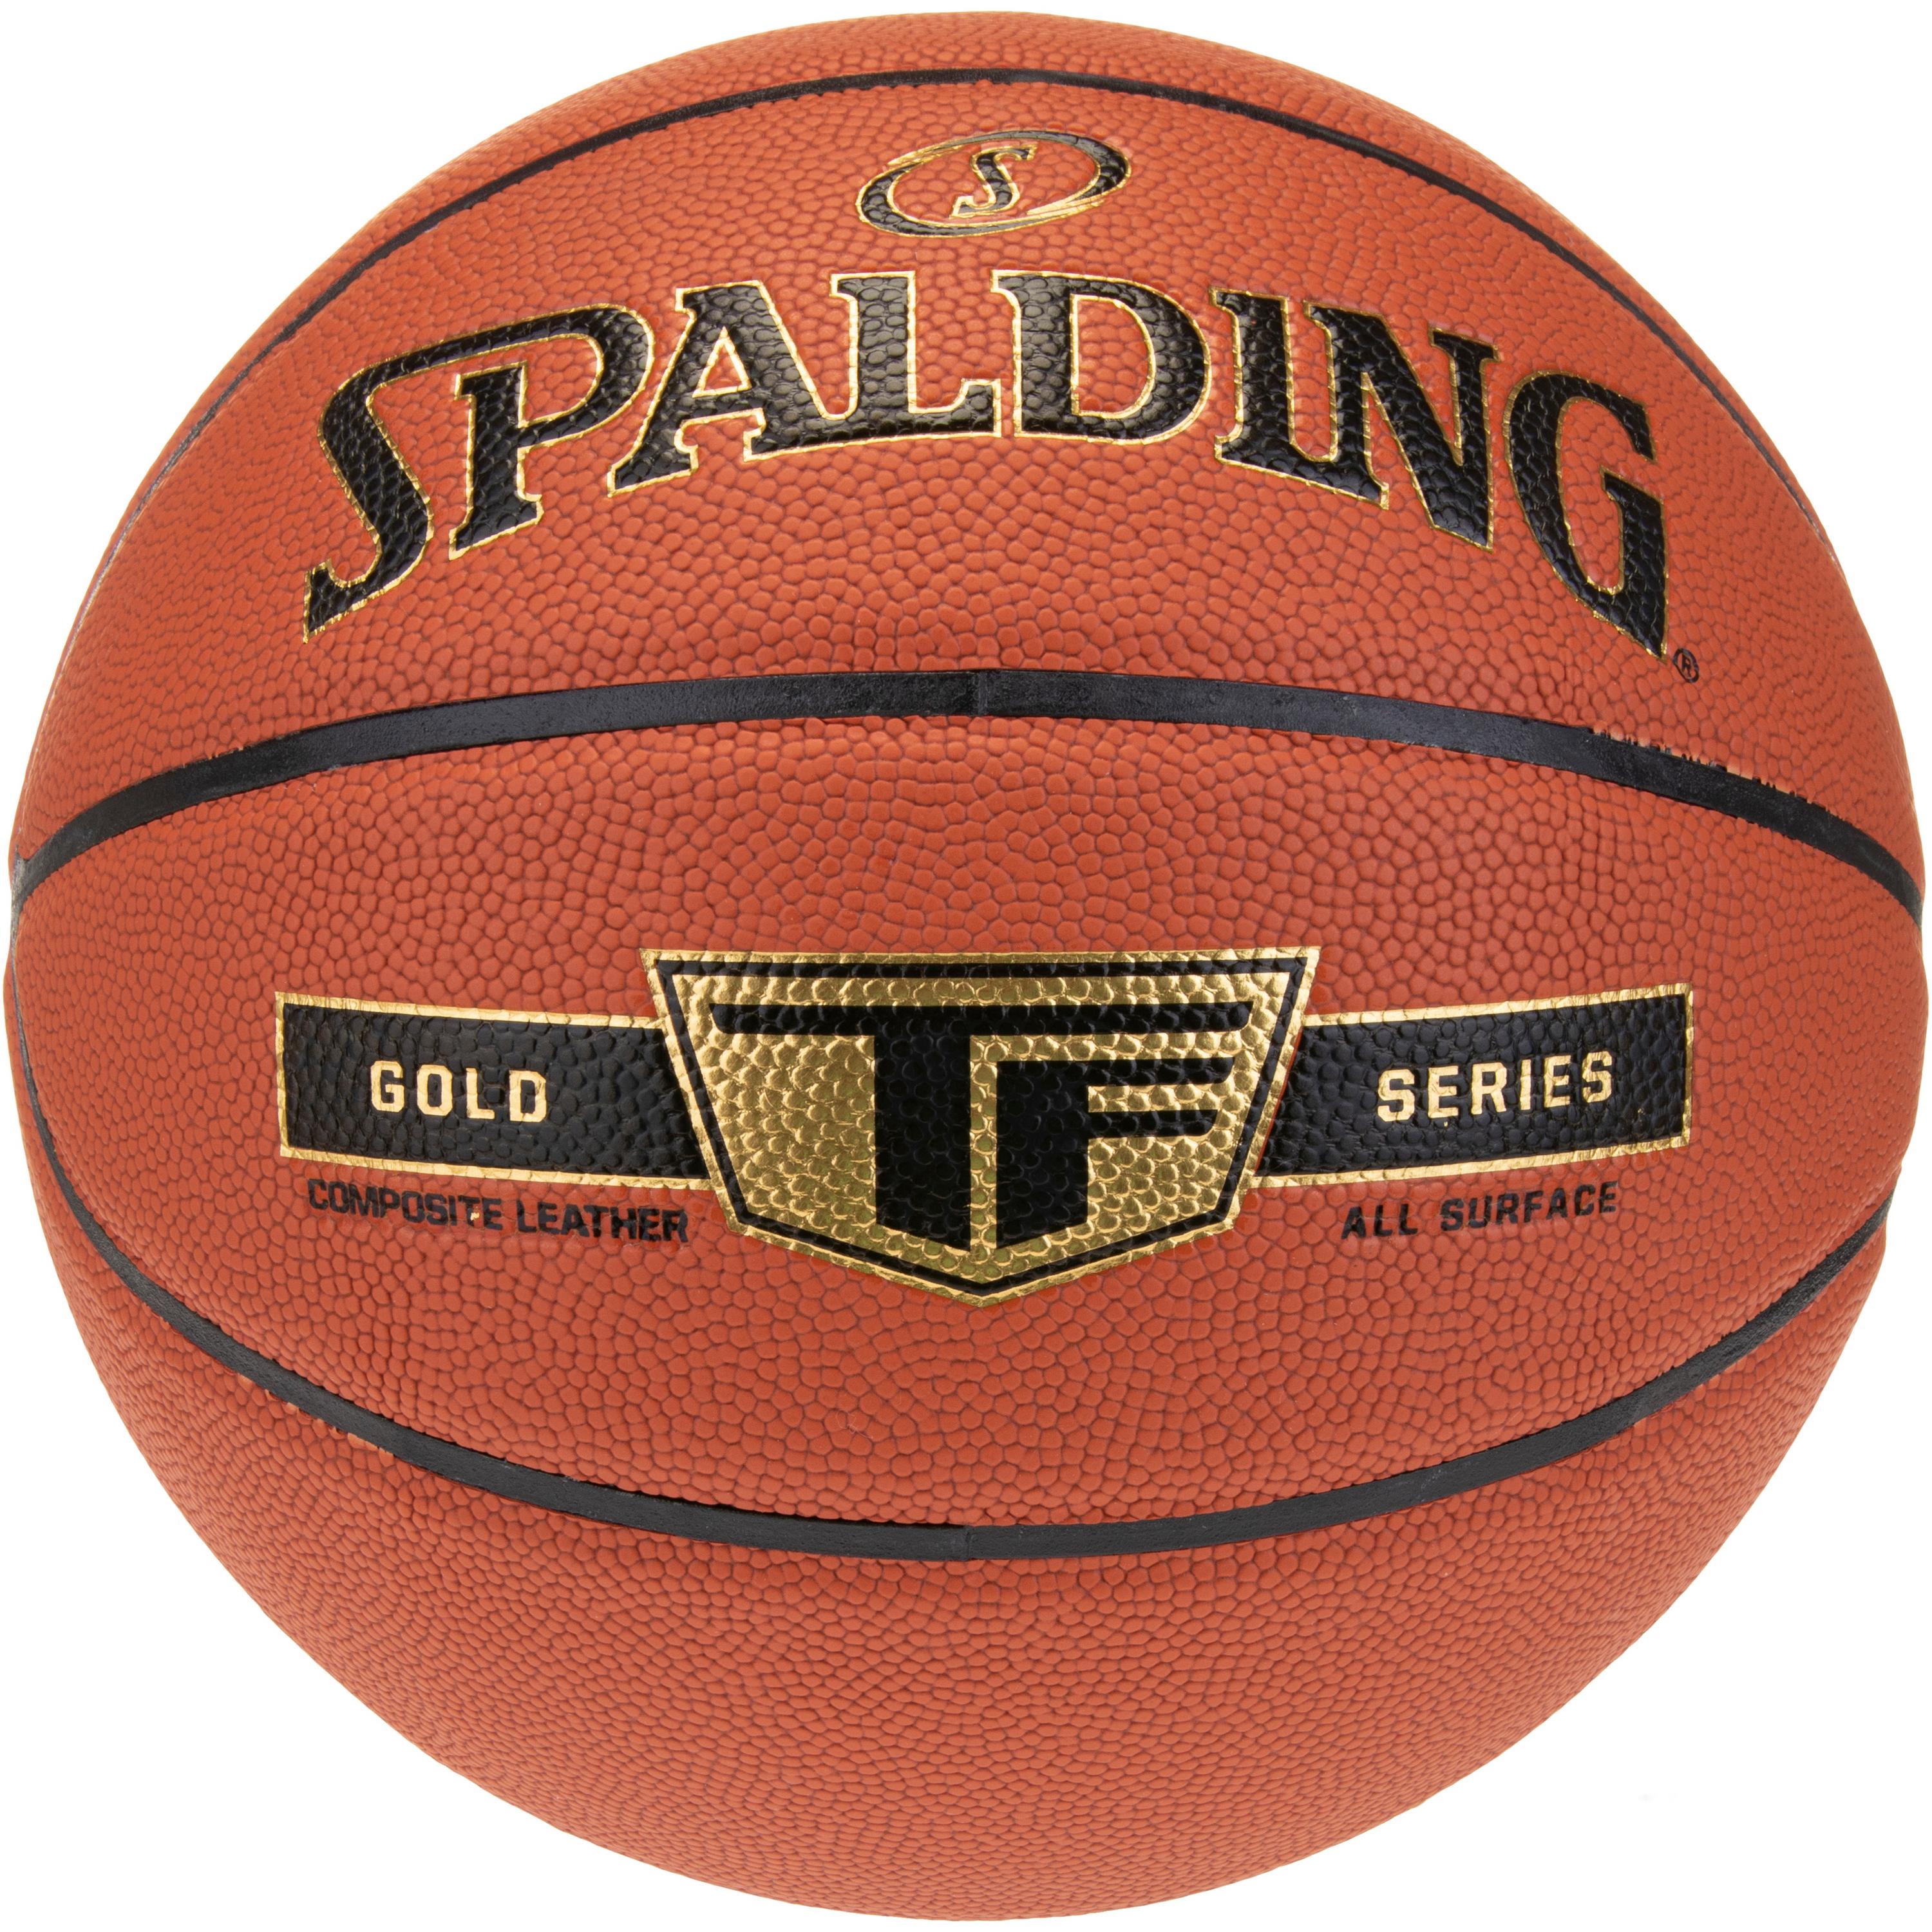 Image of Spalding TF Gold Composite Basketball